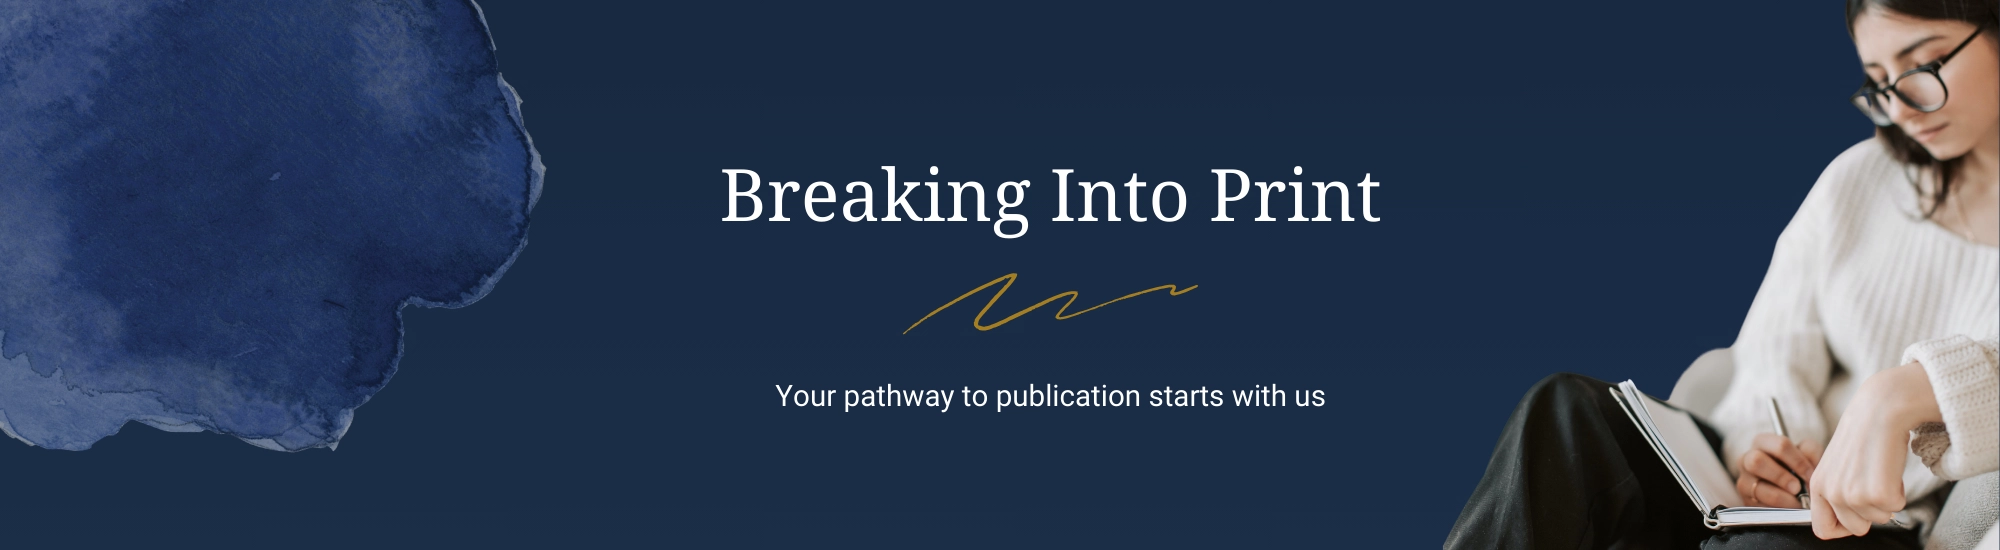 Breaking into Print. Your pathway to publication starts here